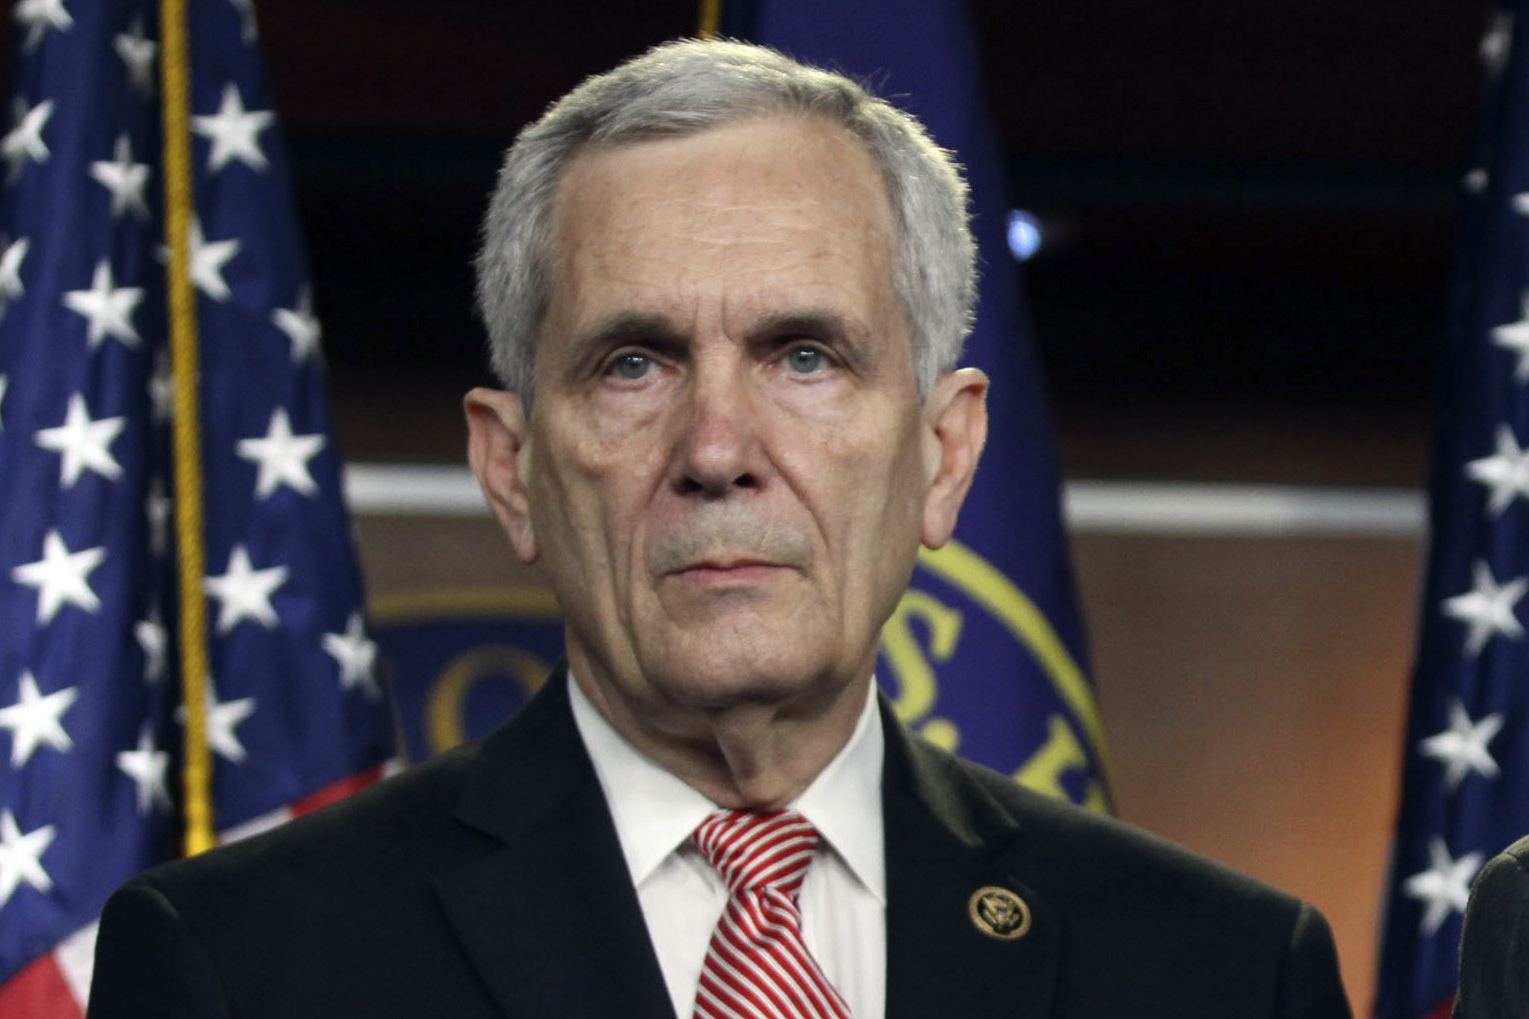 Lloyd Doggett is a member of the U.S. House of Representatives representing one Texas district. File photo.